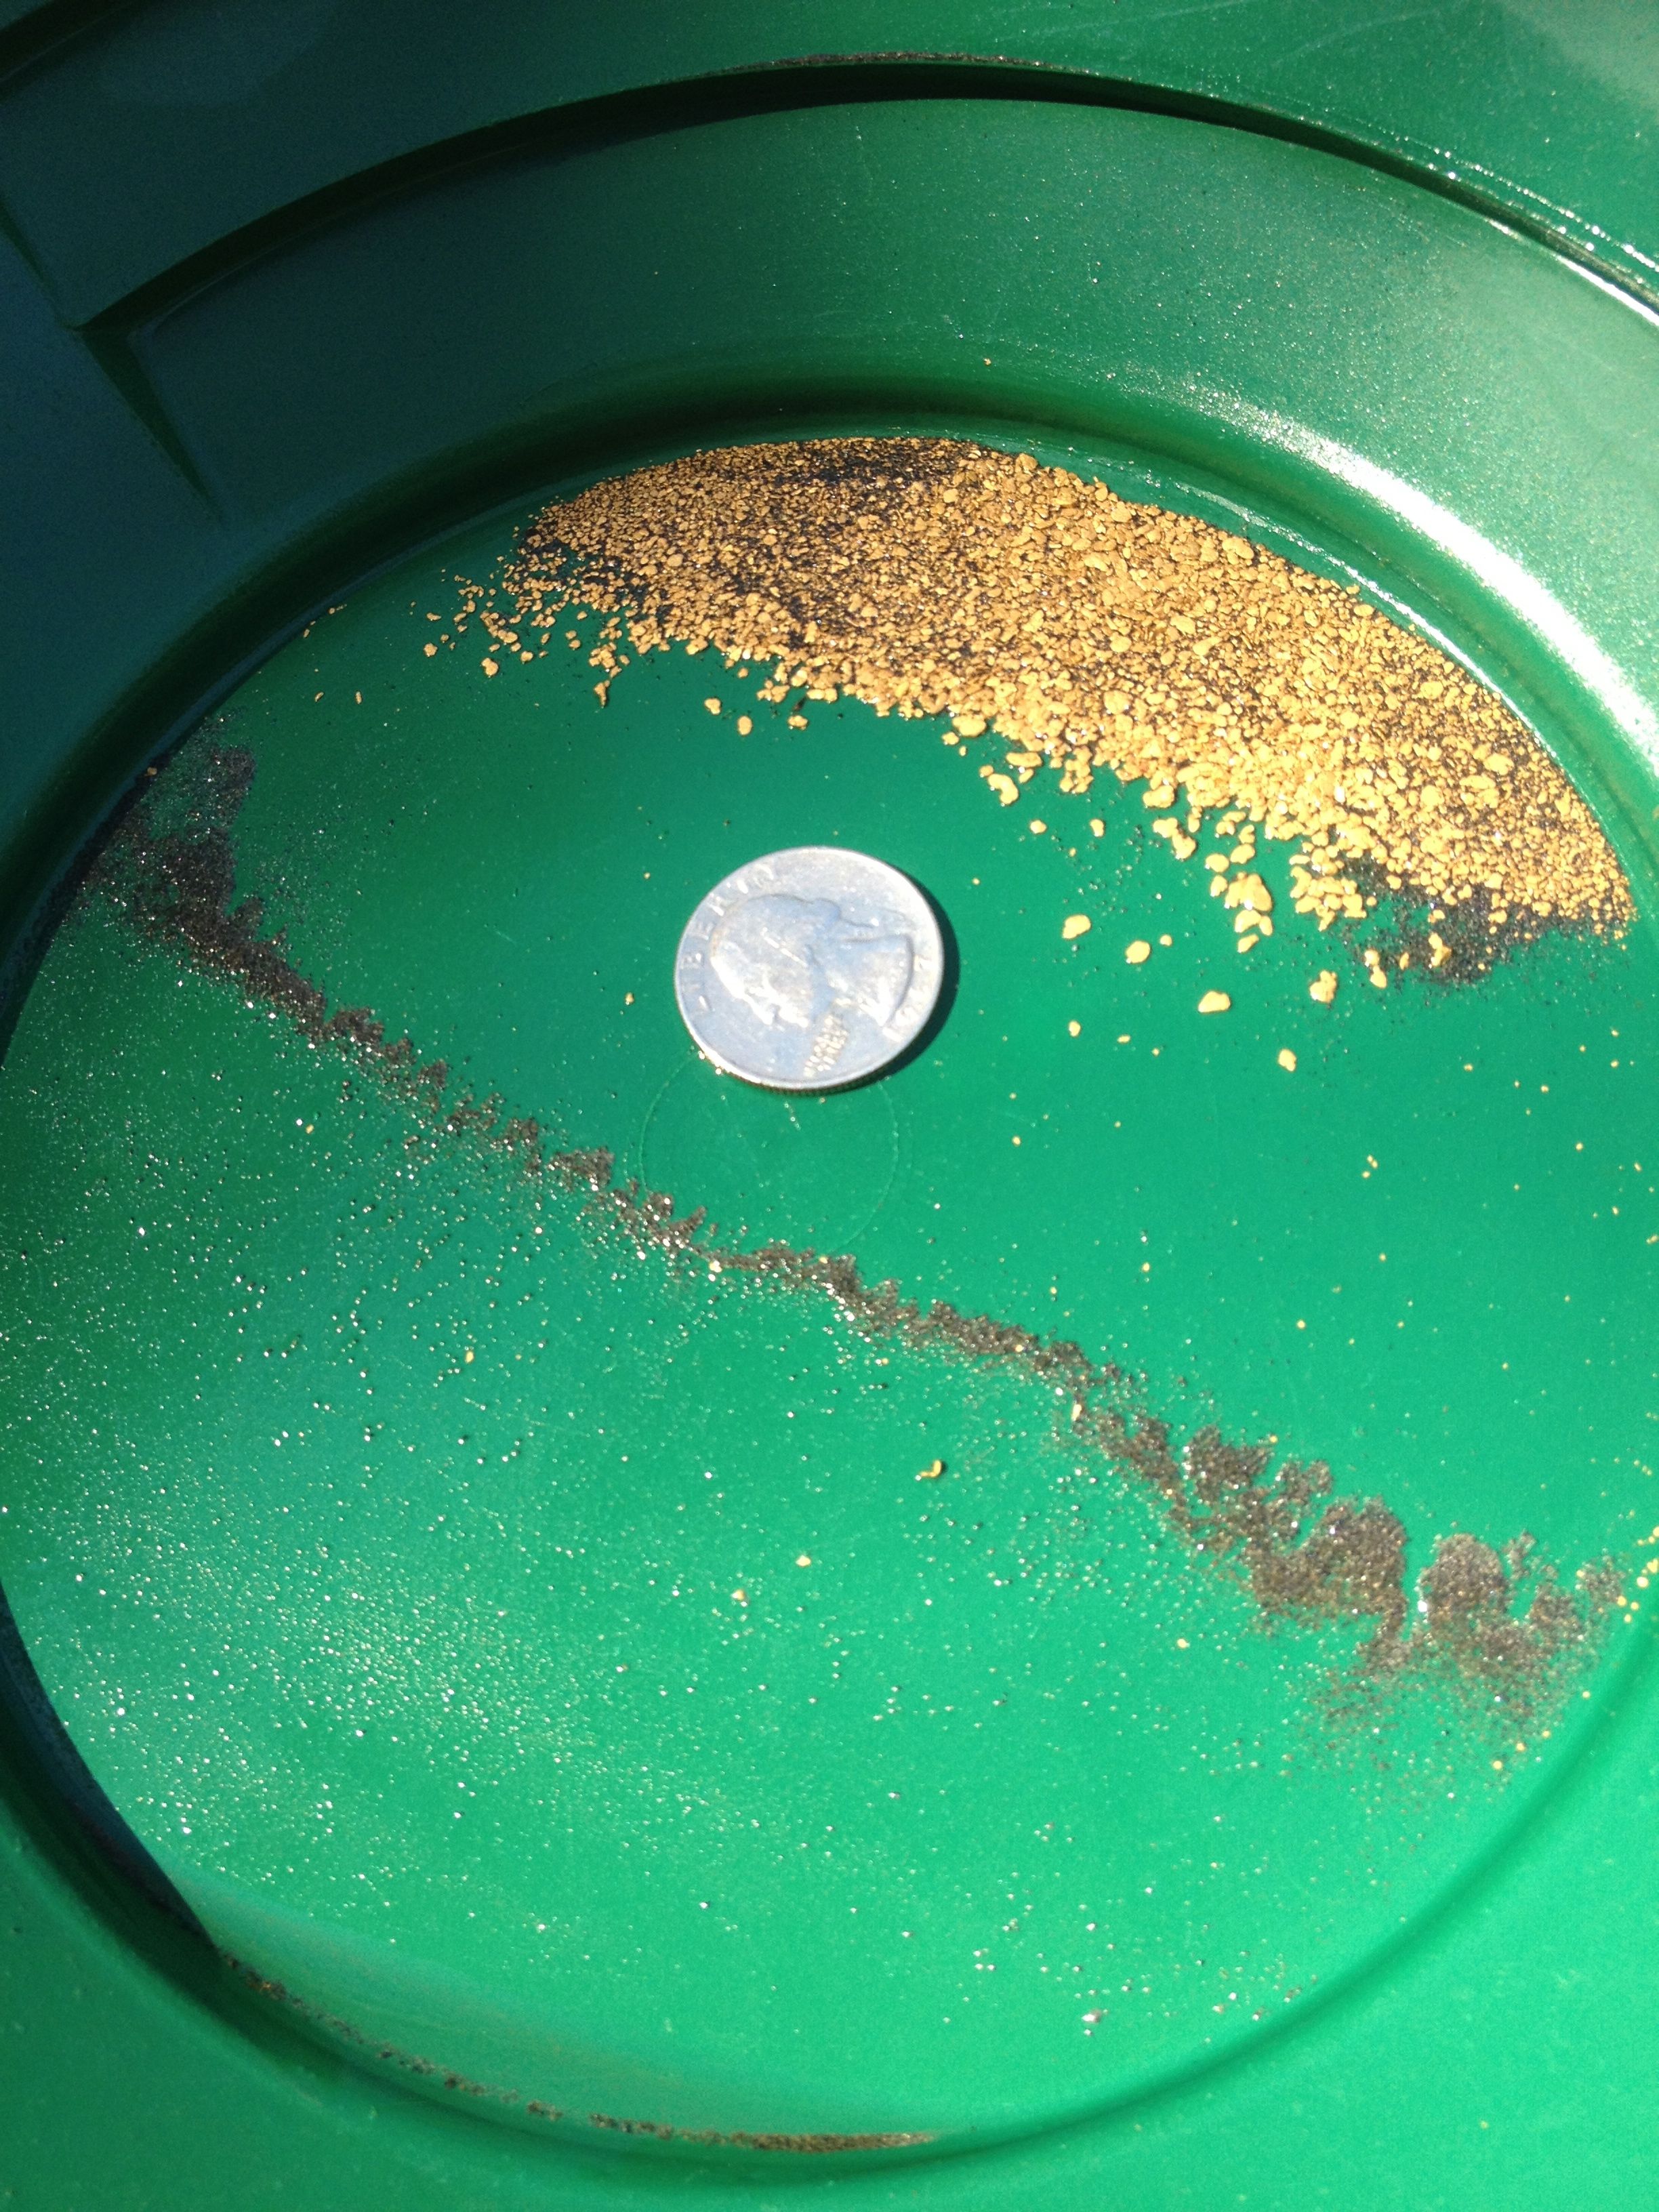 Unsearched GOLD PAYDIRT for Panning Gold Guaranteed Alaska